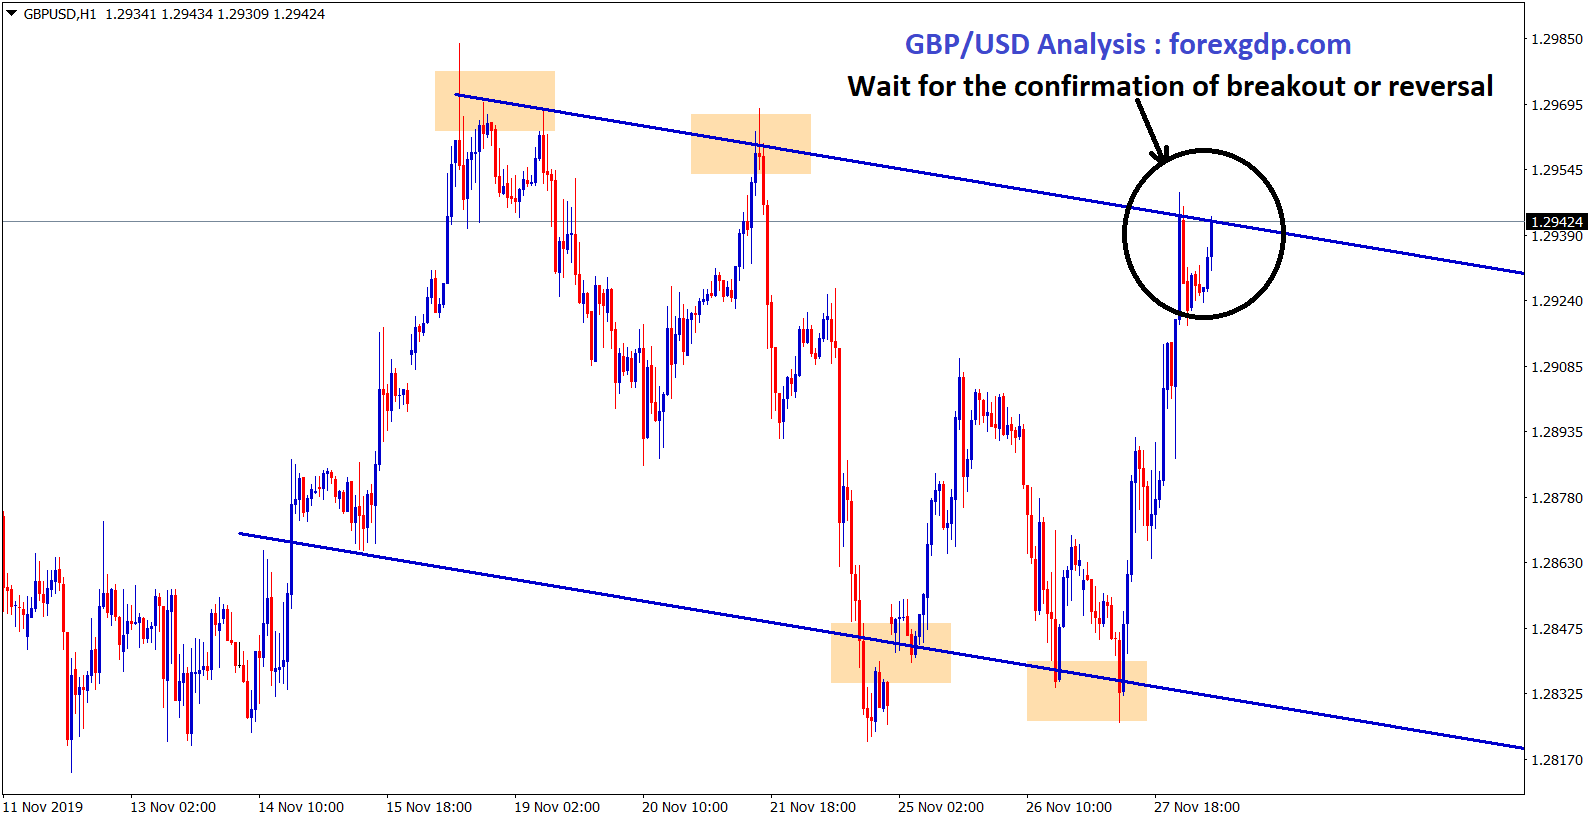 GBP USD reached the top , waiting for breakout or reversal